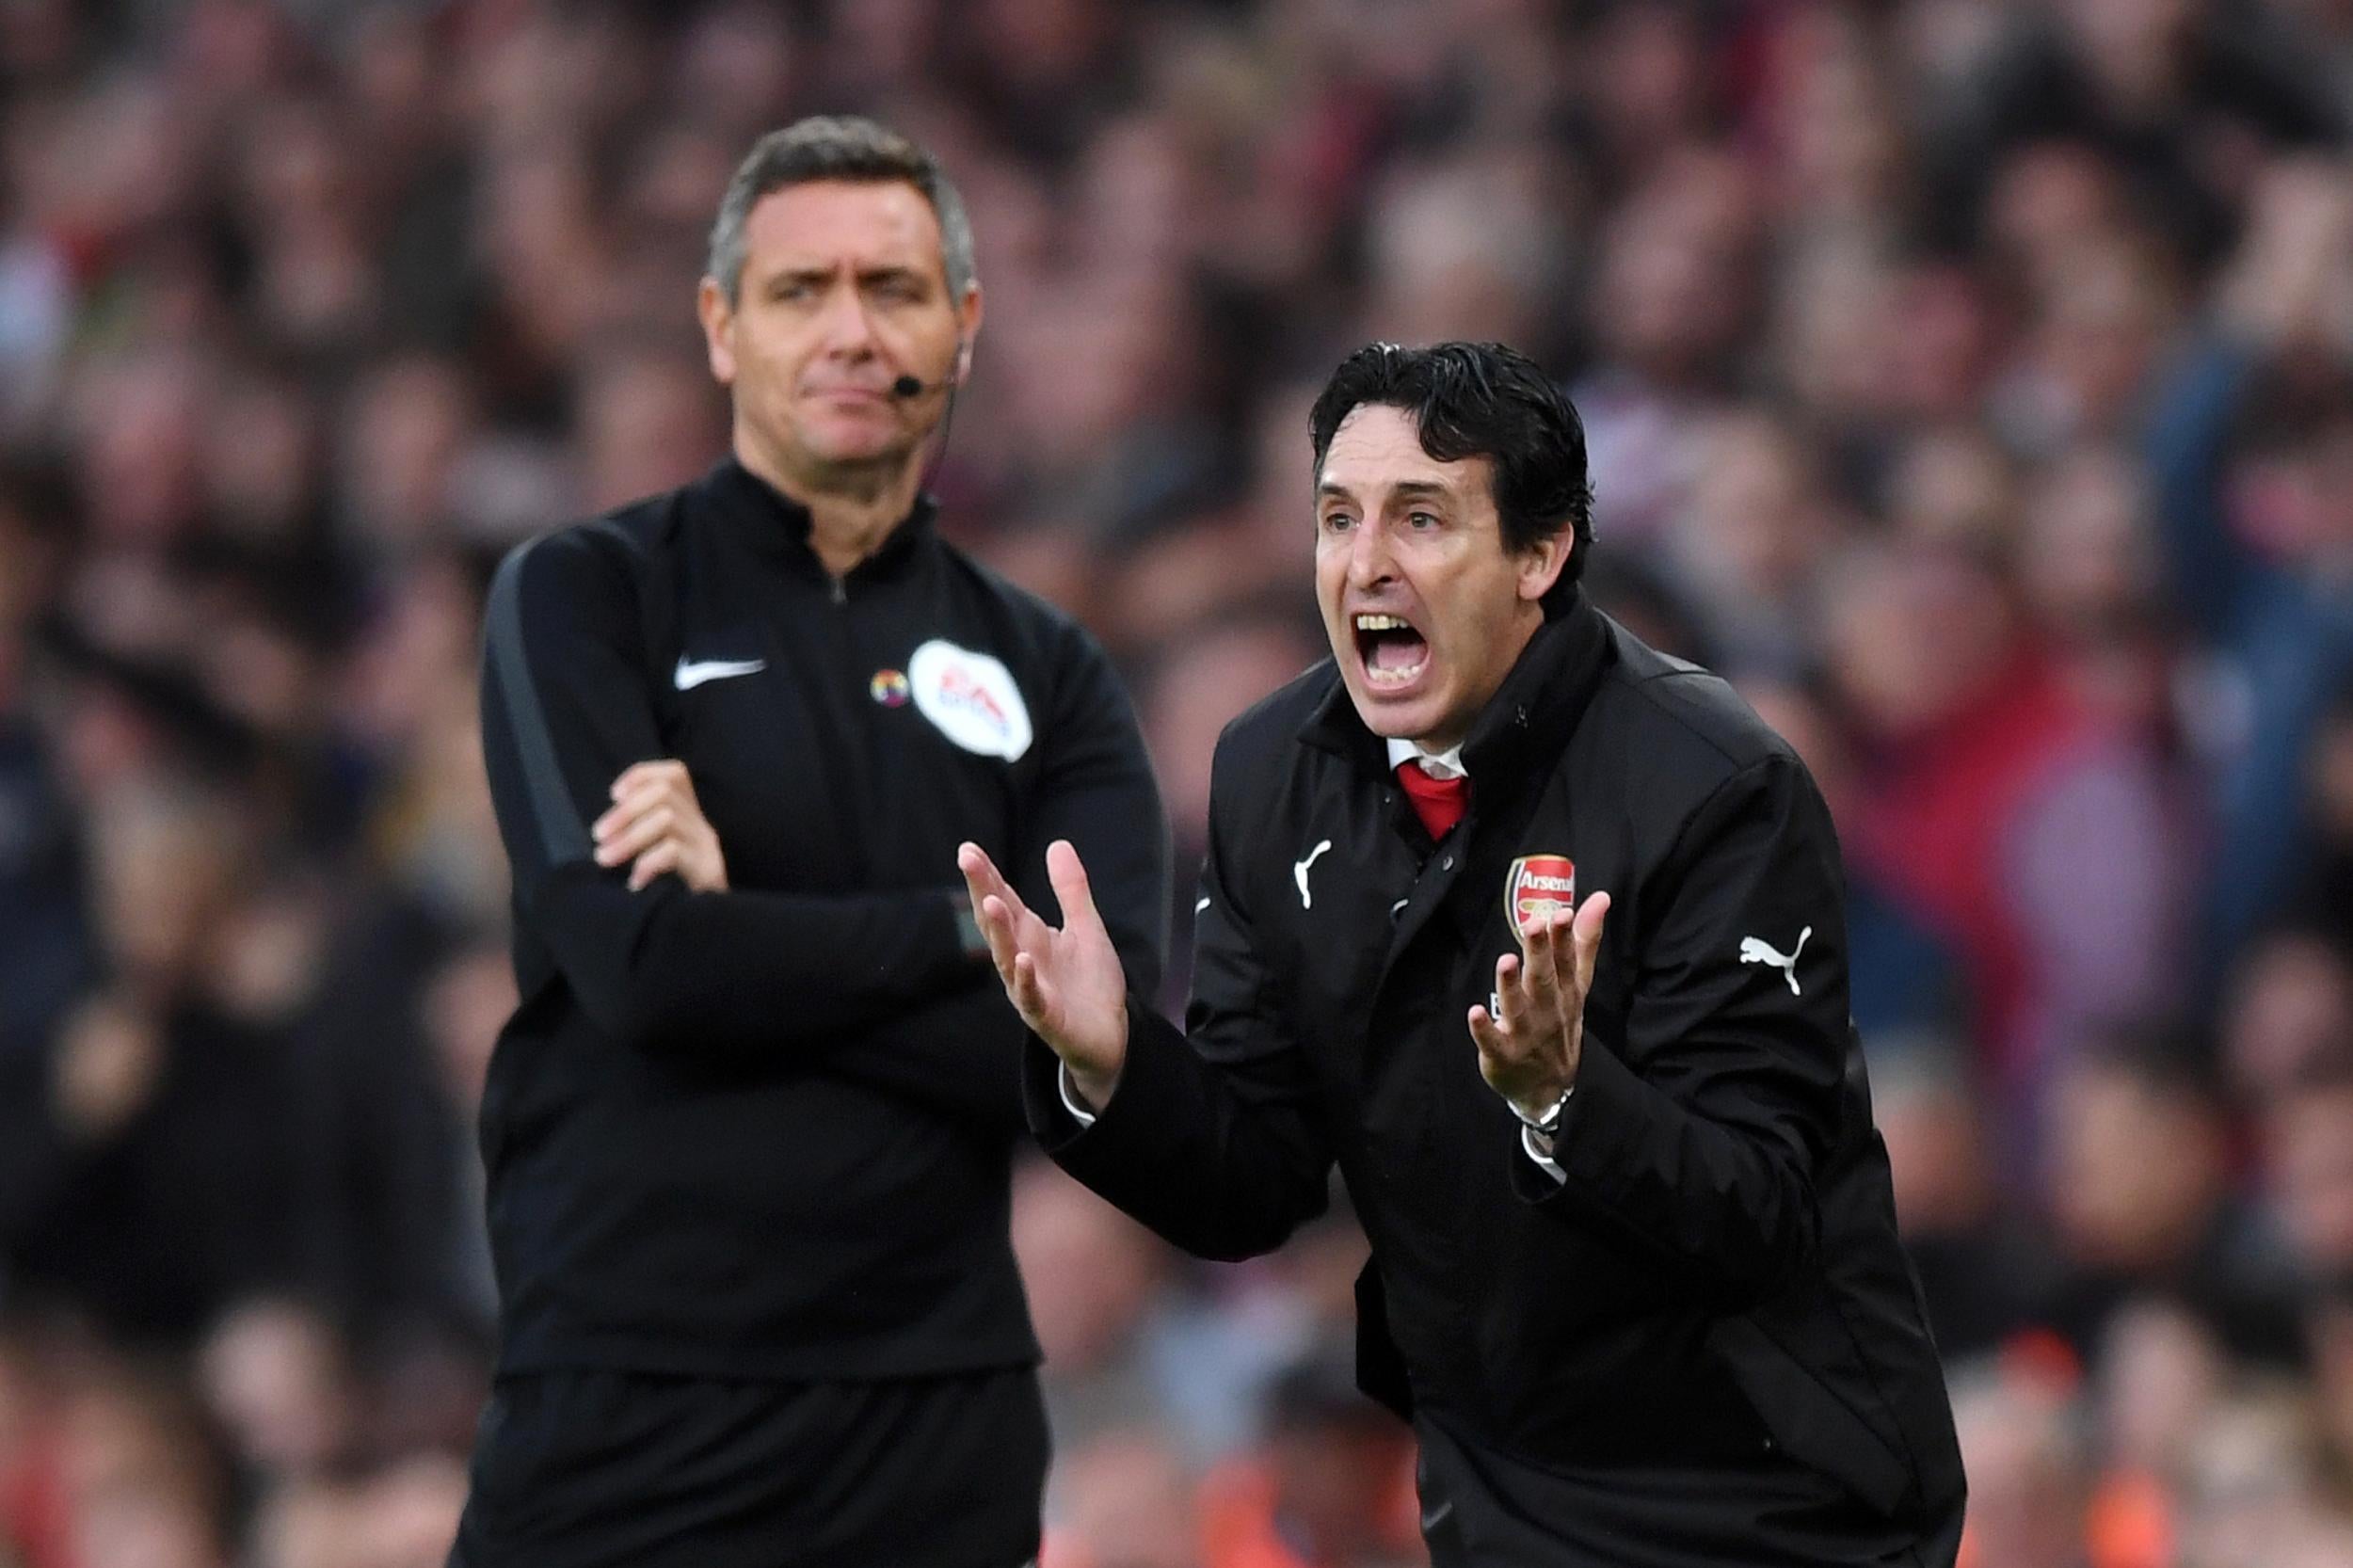 Unai Emery masterminded an important Arsenal win